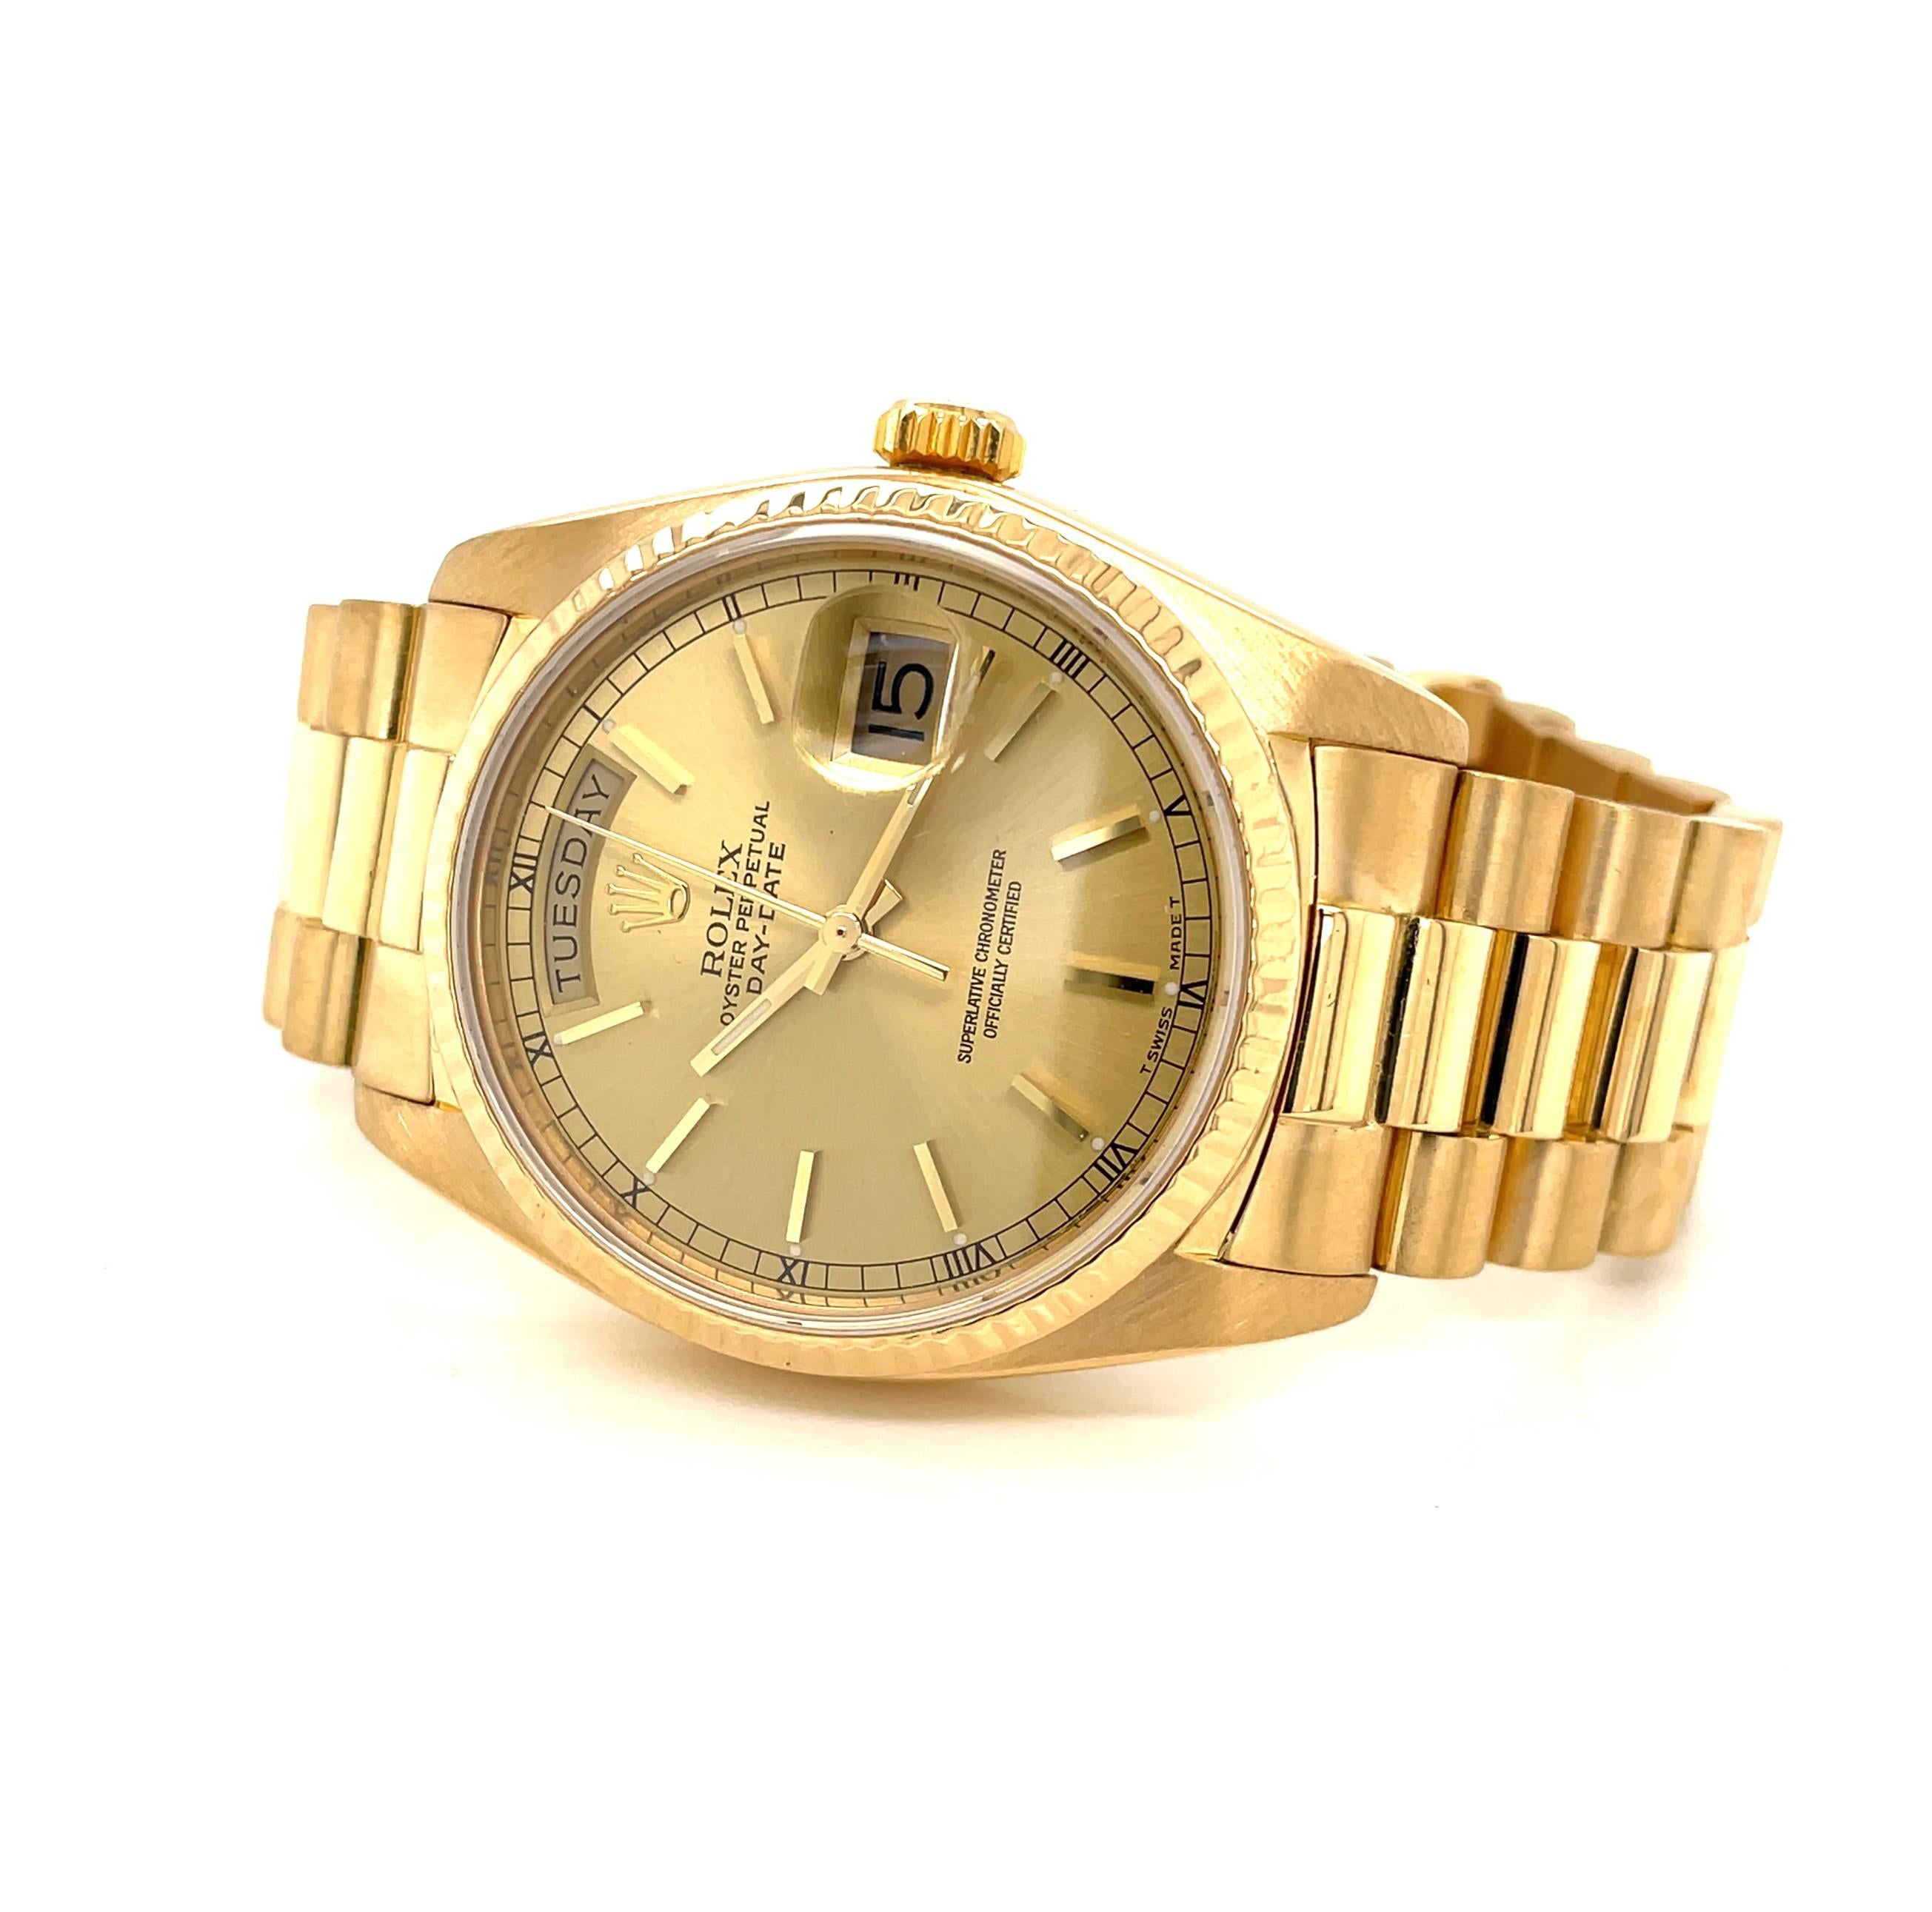 Rolex 18 Kt Yellow Gold President 3055 Men's Wrist Watch w Bracelet, Box, Papers In Excellent Condition For Sale In Mount Kisco, NY